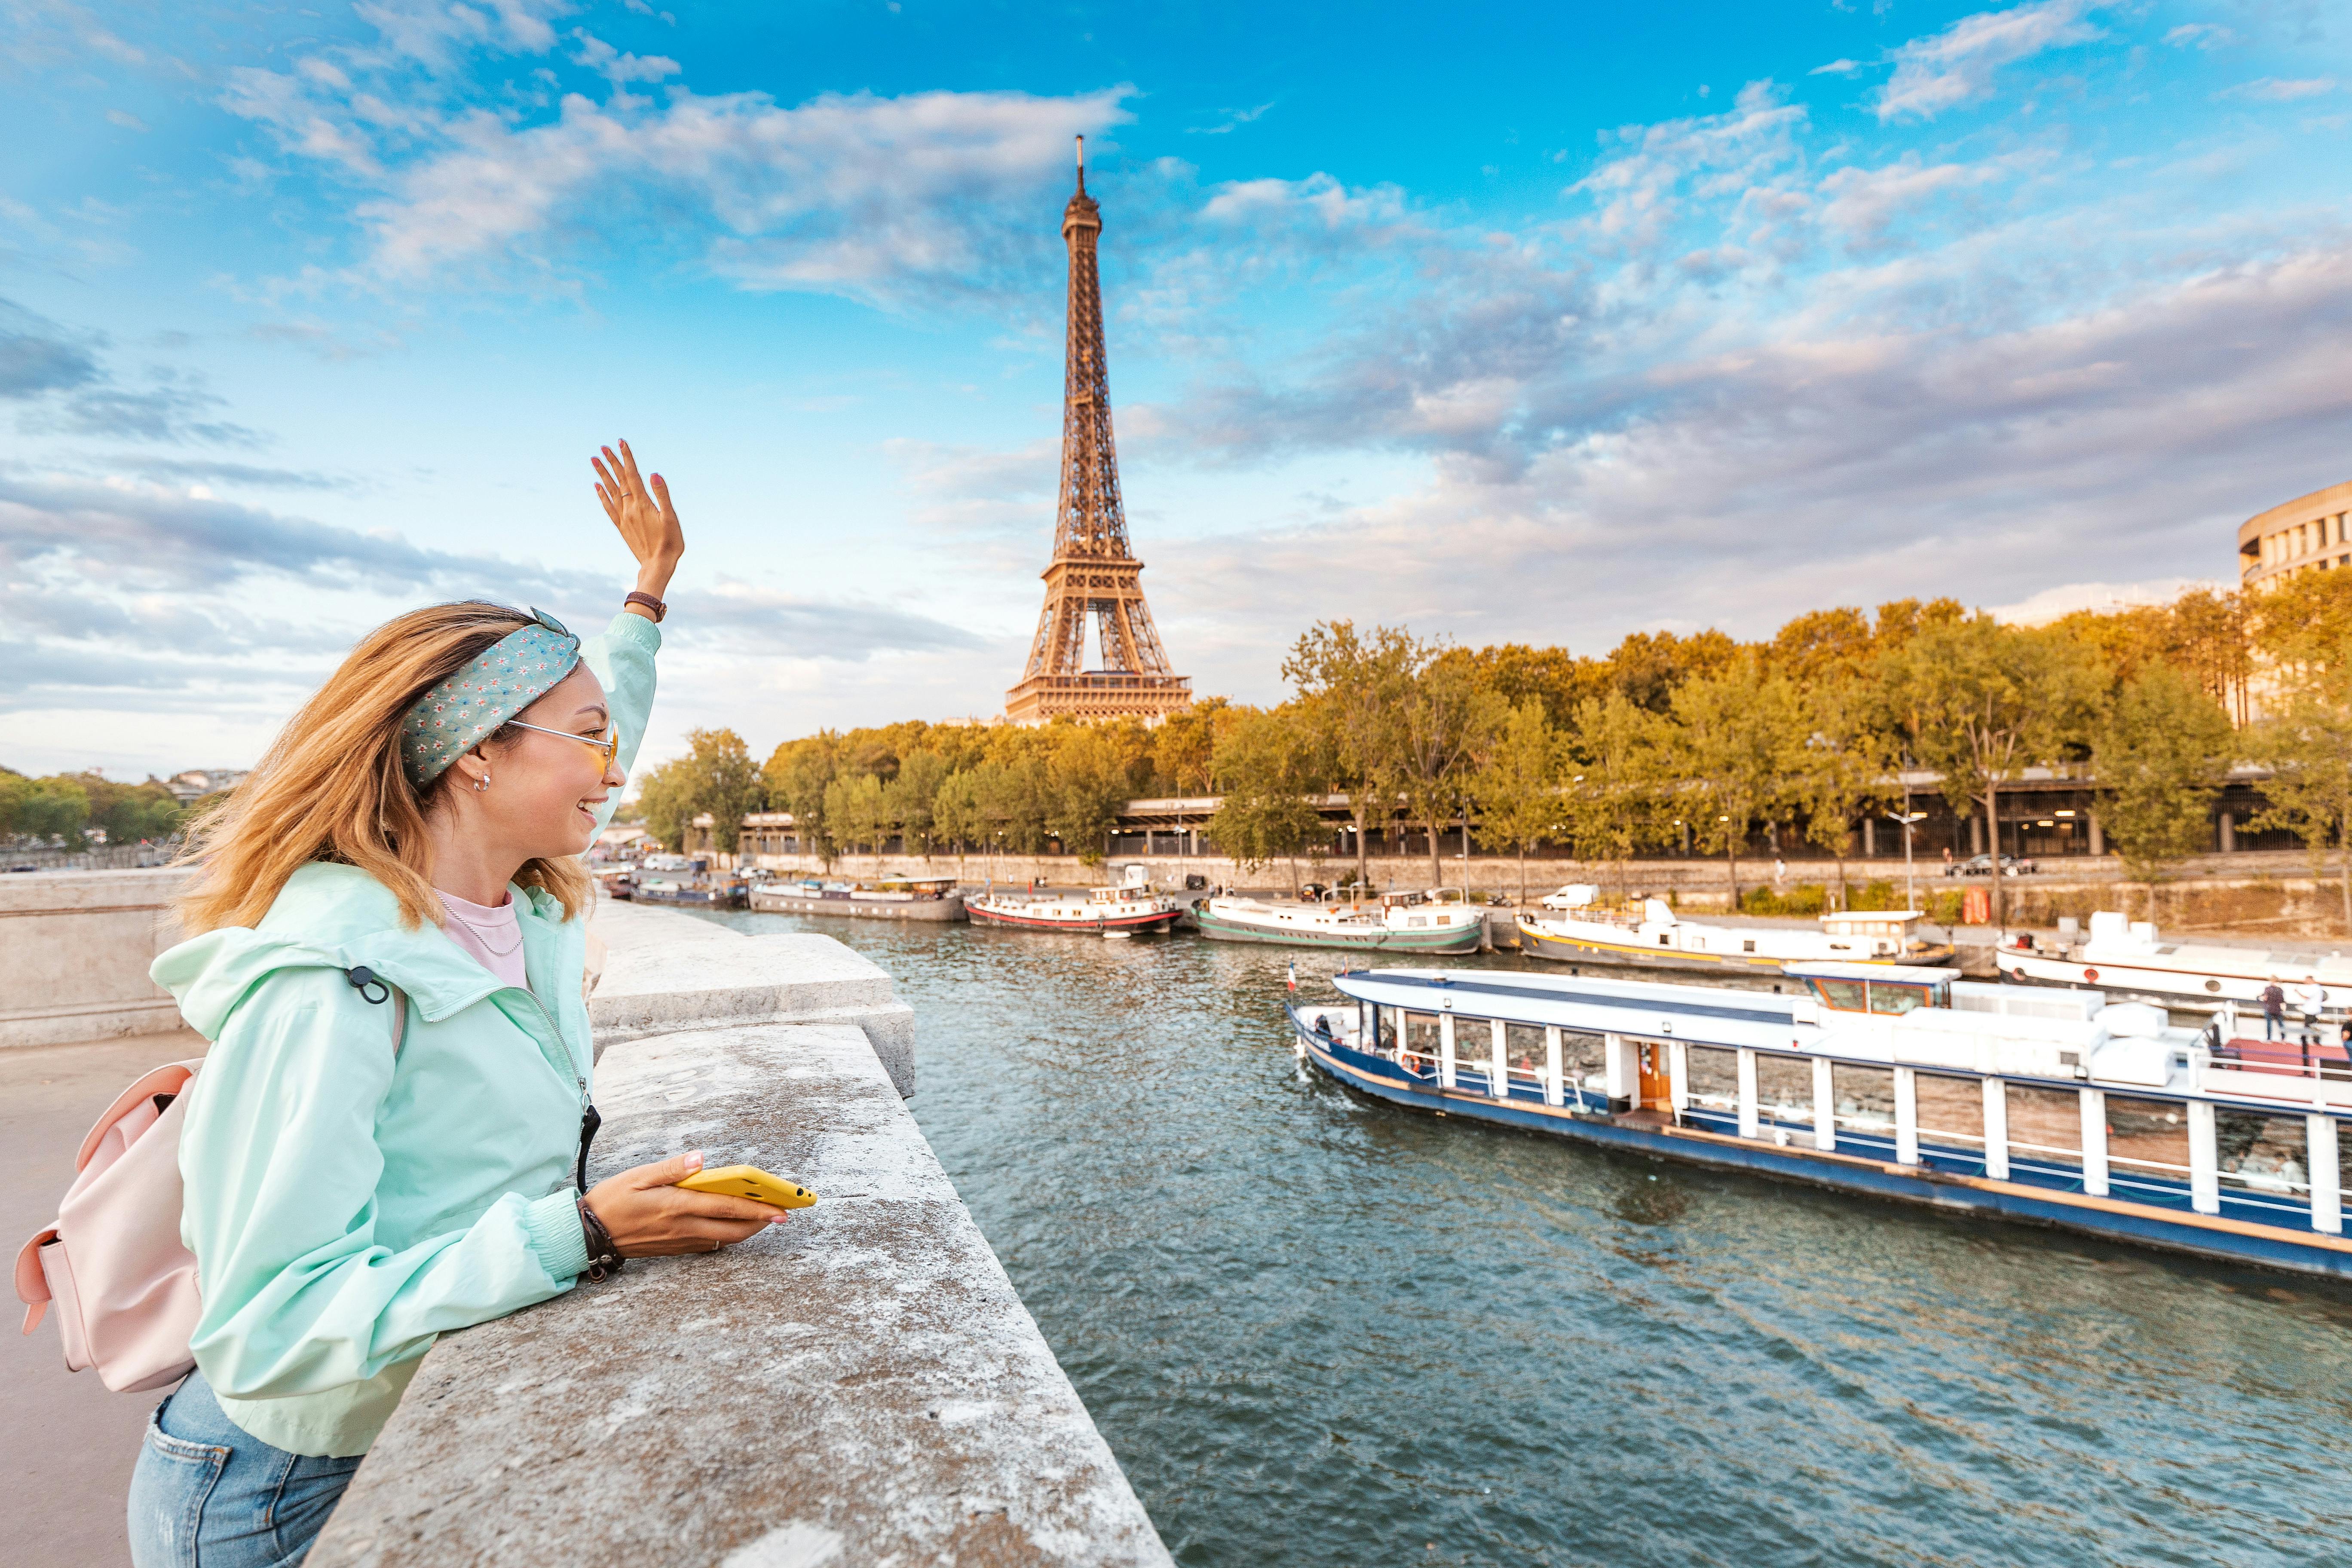 Dinner cruise and Eiffel Tower 2nd floor tickets